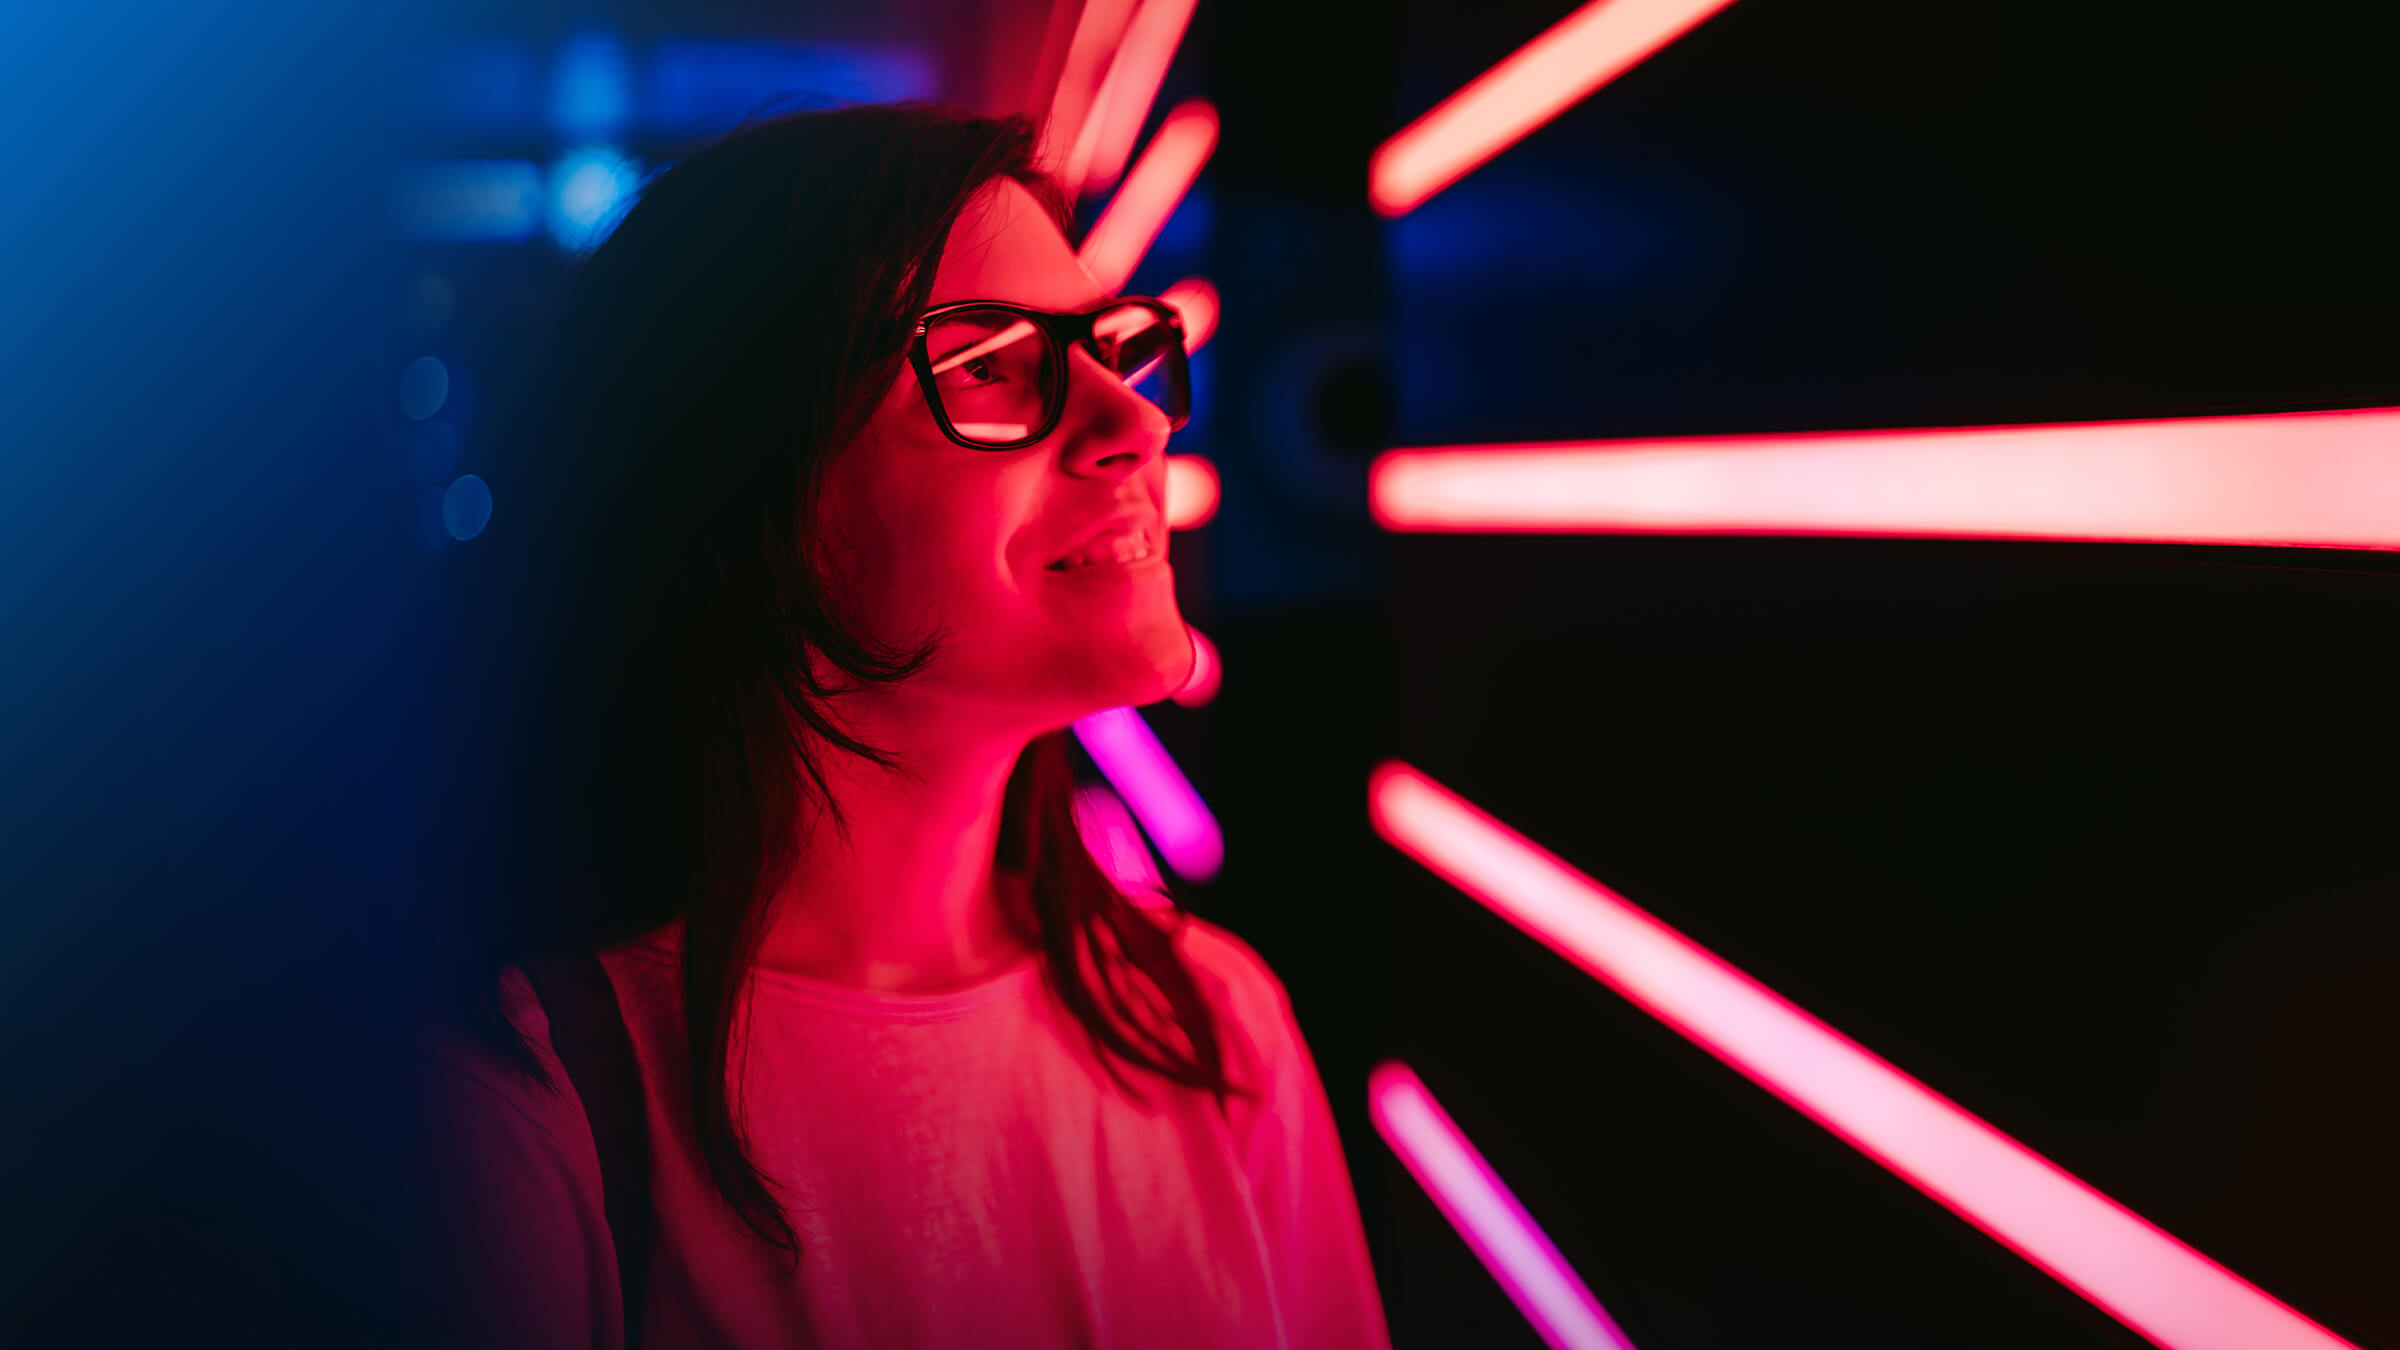 Curious woman and neon lights